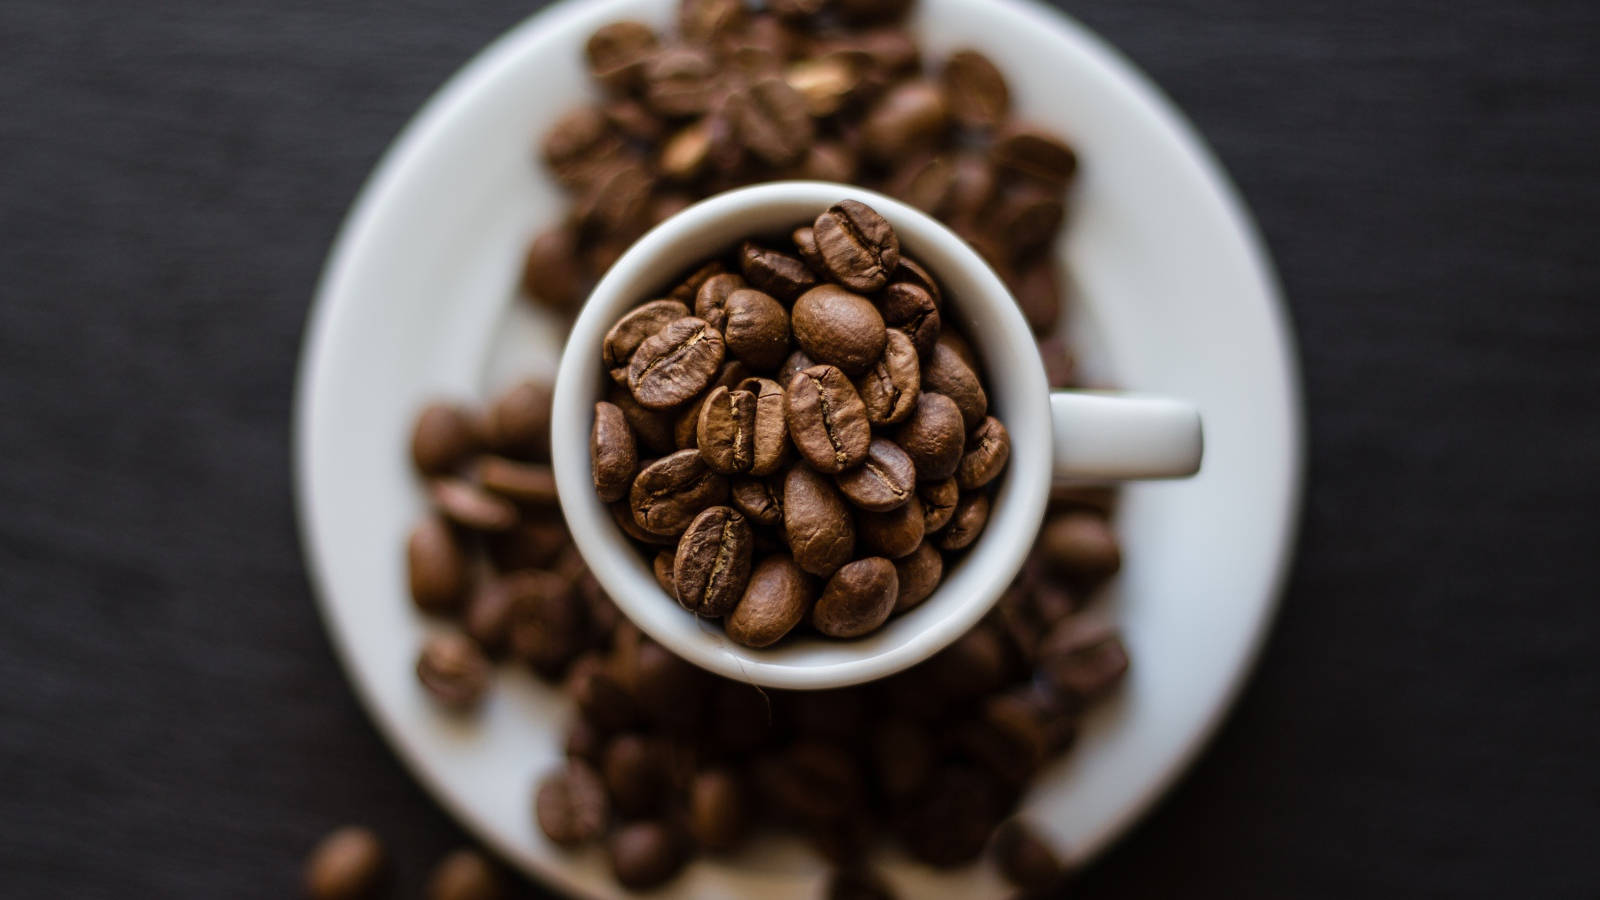 Top View Of Coffee Cup With Coffee Beans Picture